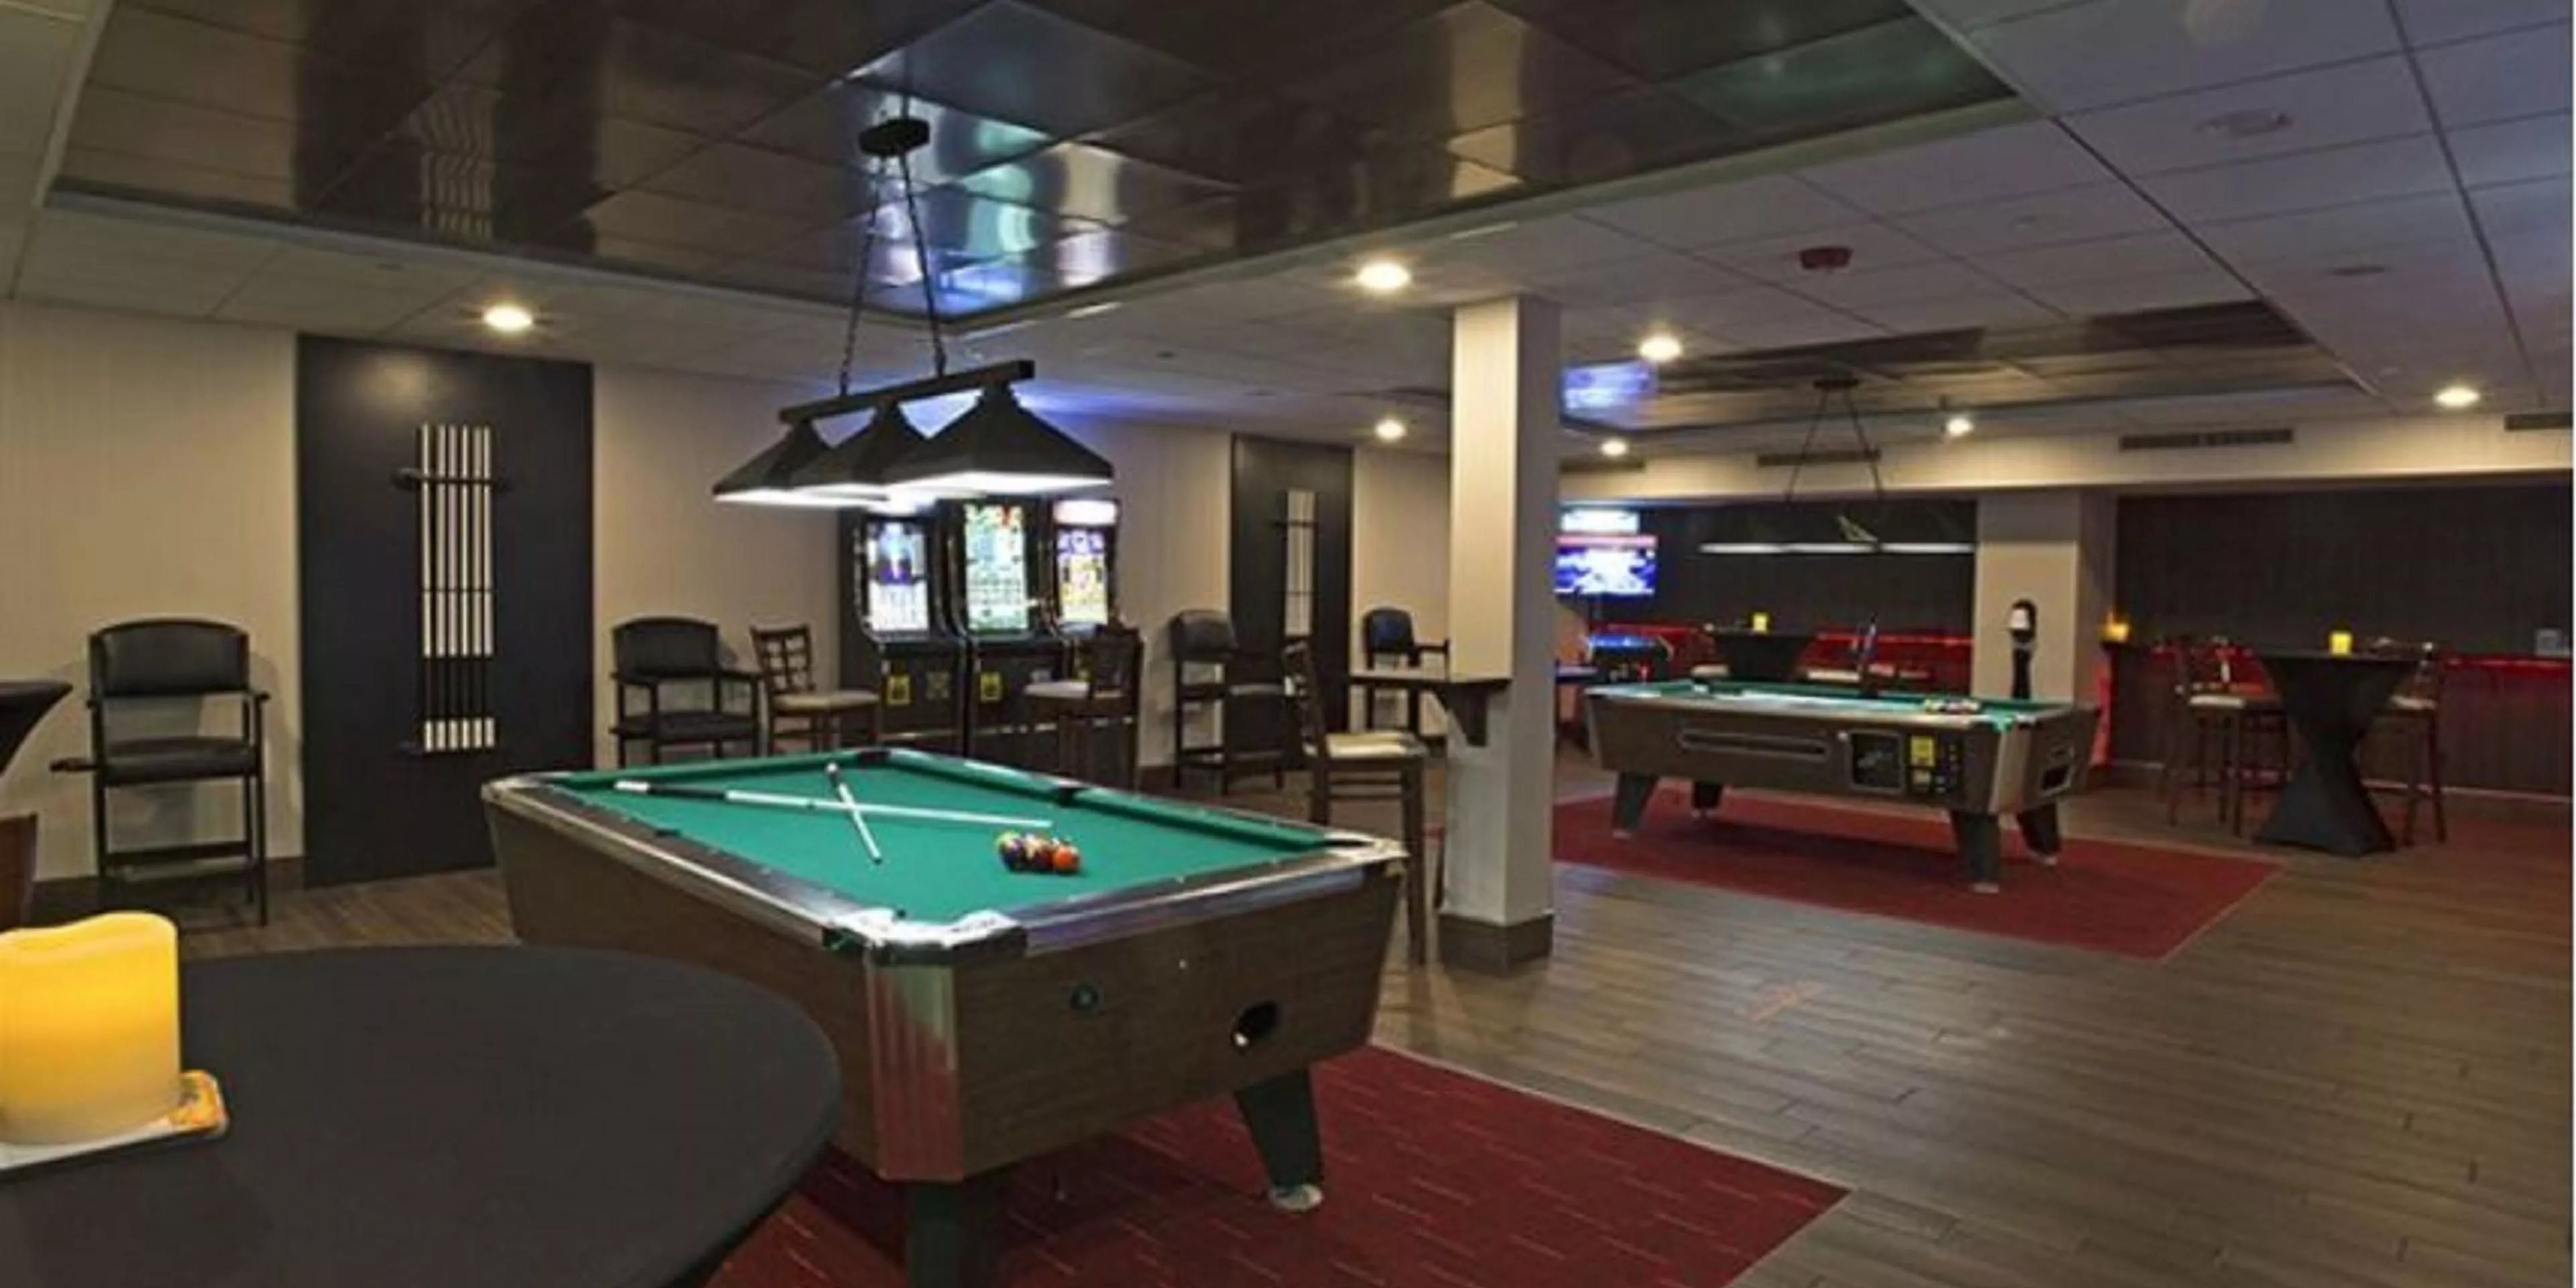 Arena Billiards in Lithuania, Europe | Billiards - Rated 0.9